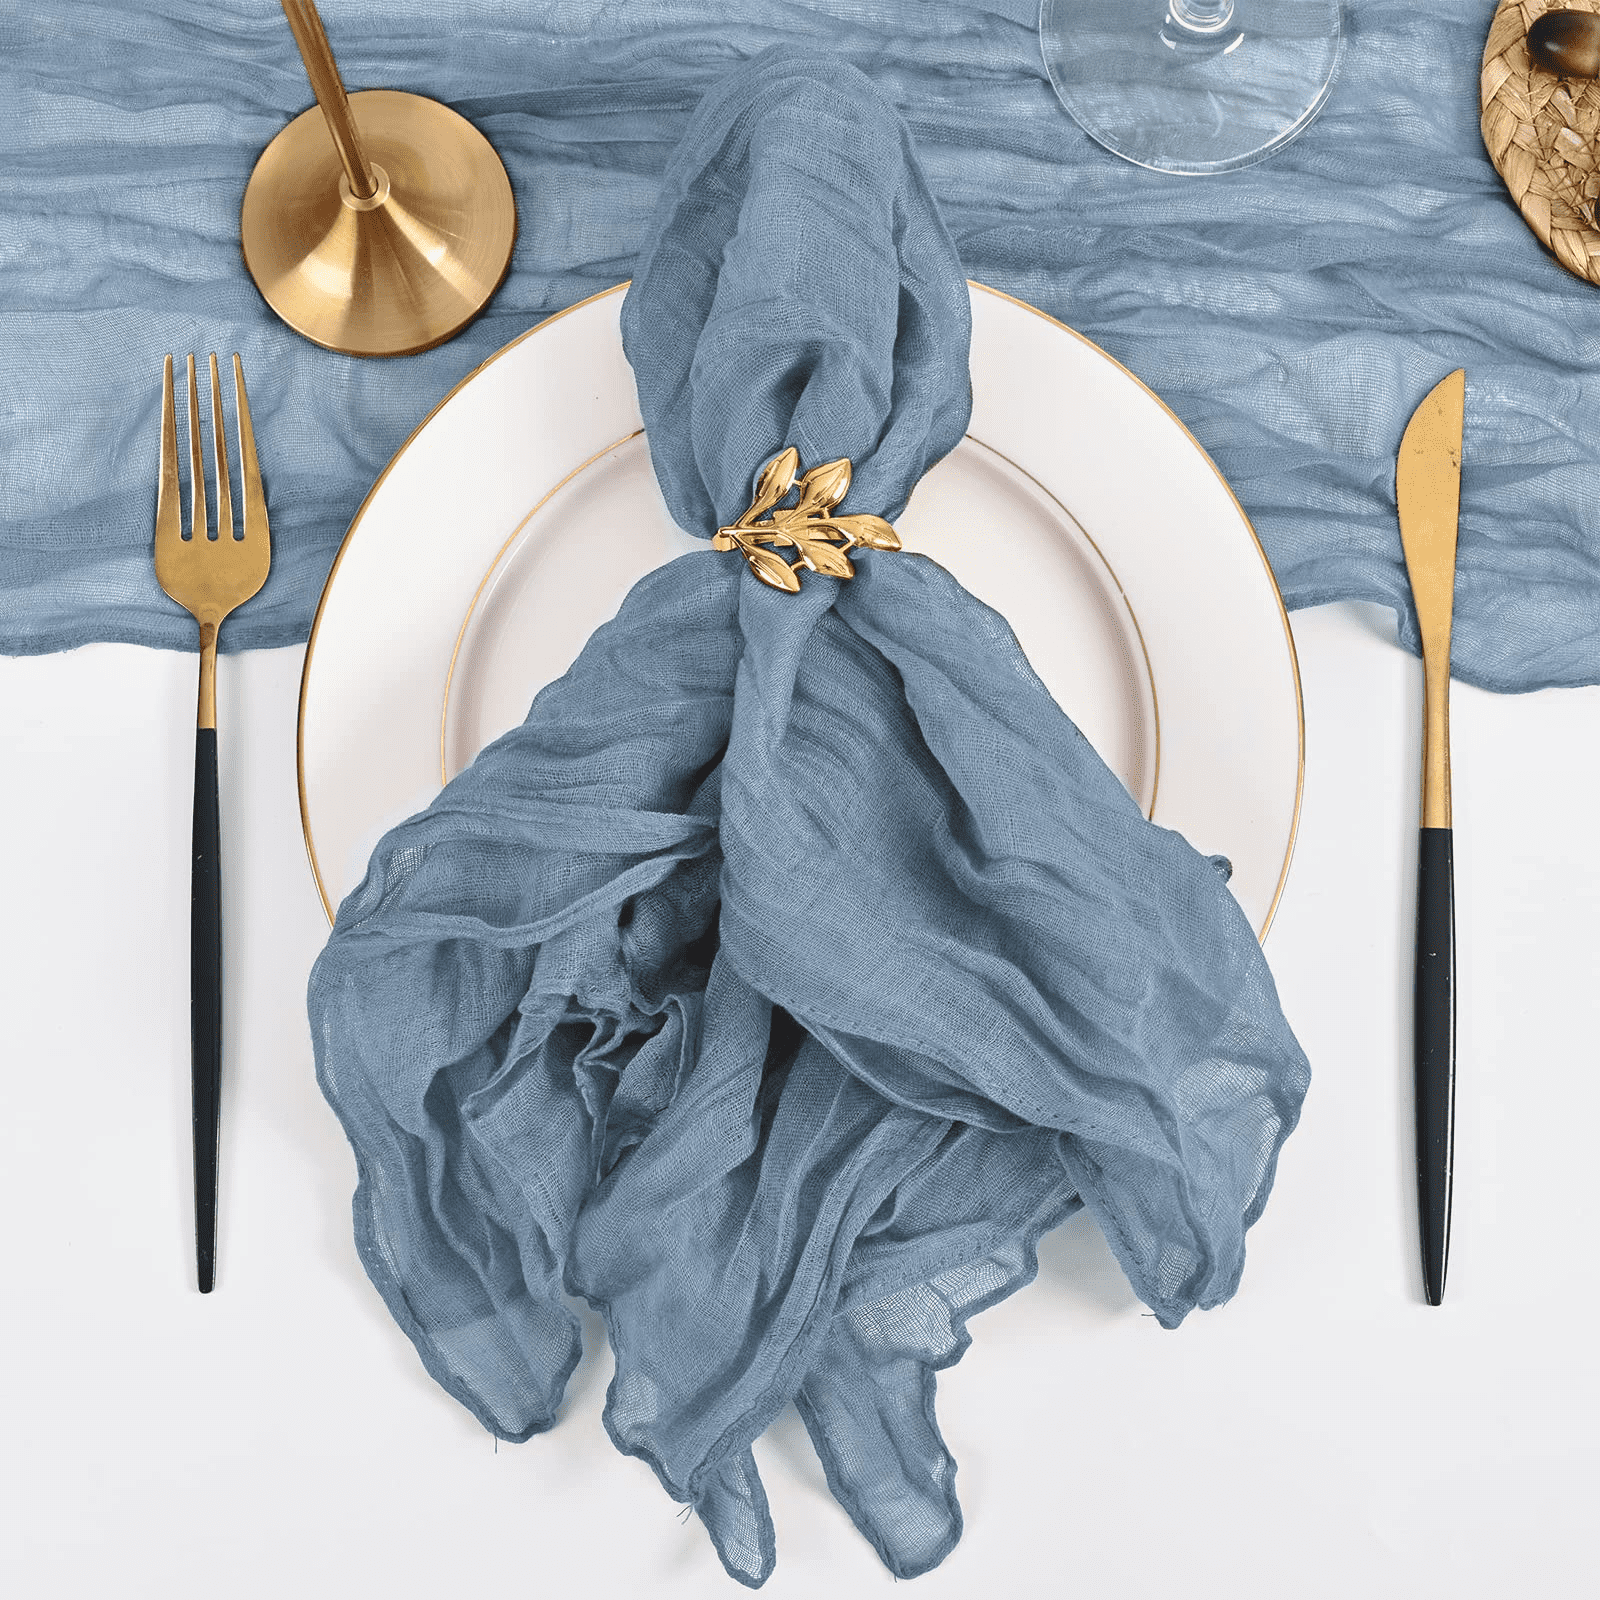  DeZerlor 20Pack Champagne Gauze Cheesecloth Napkins Boho Rustic Cloth  Napkins Bulk 21x21 Soft Cotton Linen Dinner Napkins for Christmas Table  Decor New Year Wedding Bridal Baby Shower Daily Use : Home